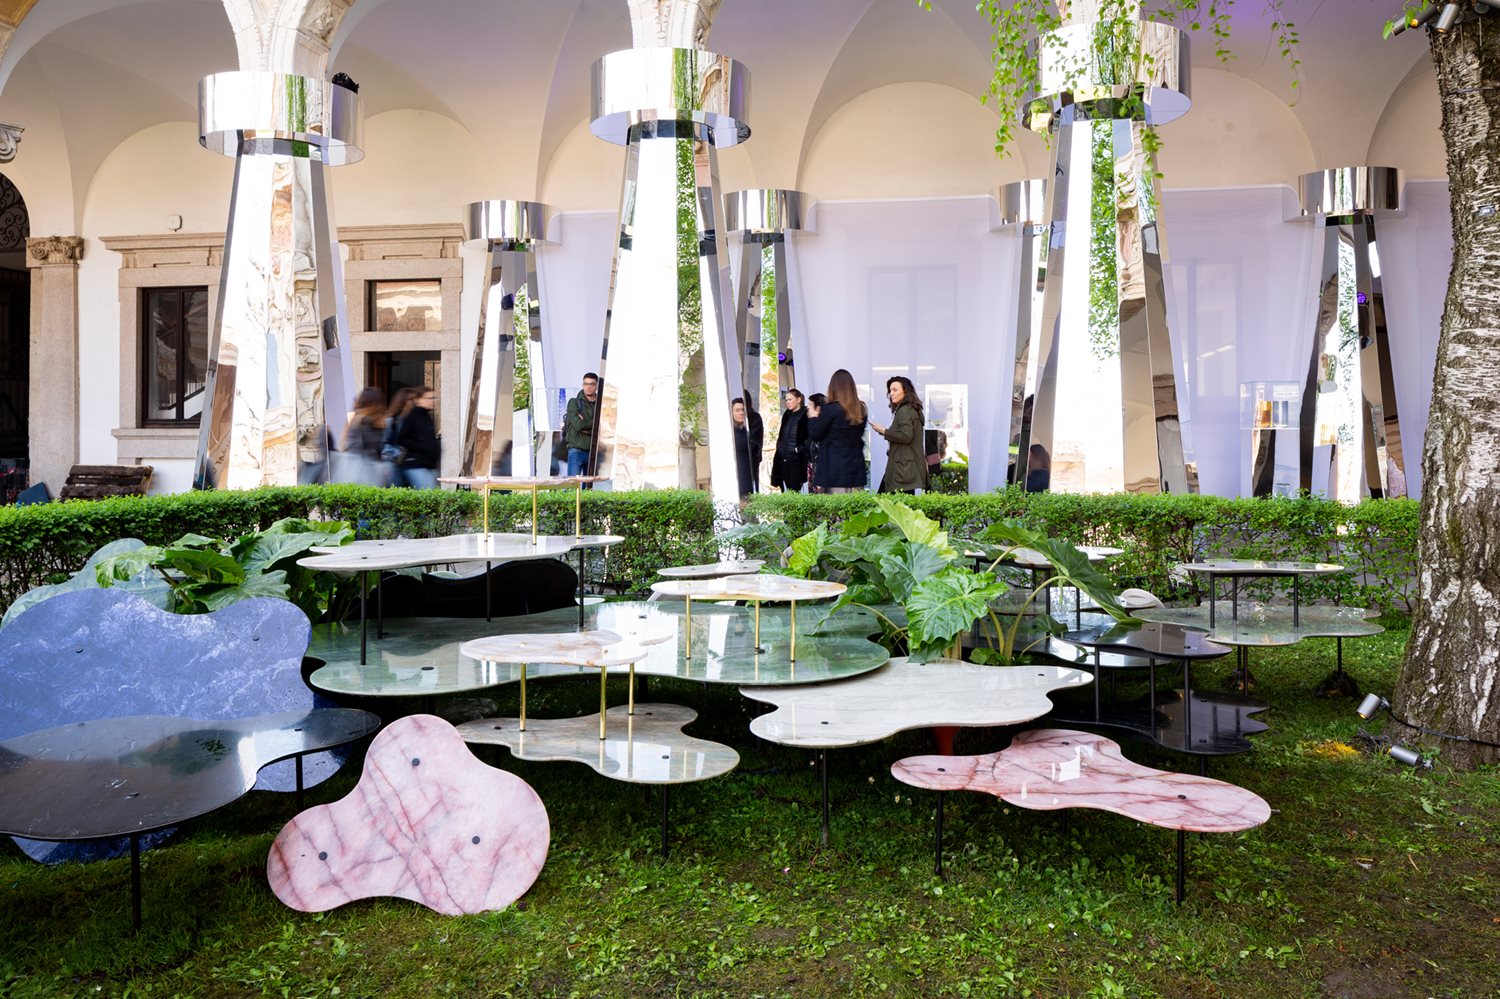 All the collaborations of iGuzzini during Fuorisalone 2019